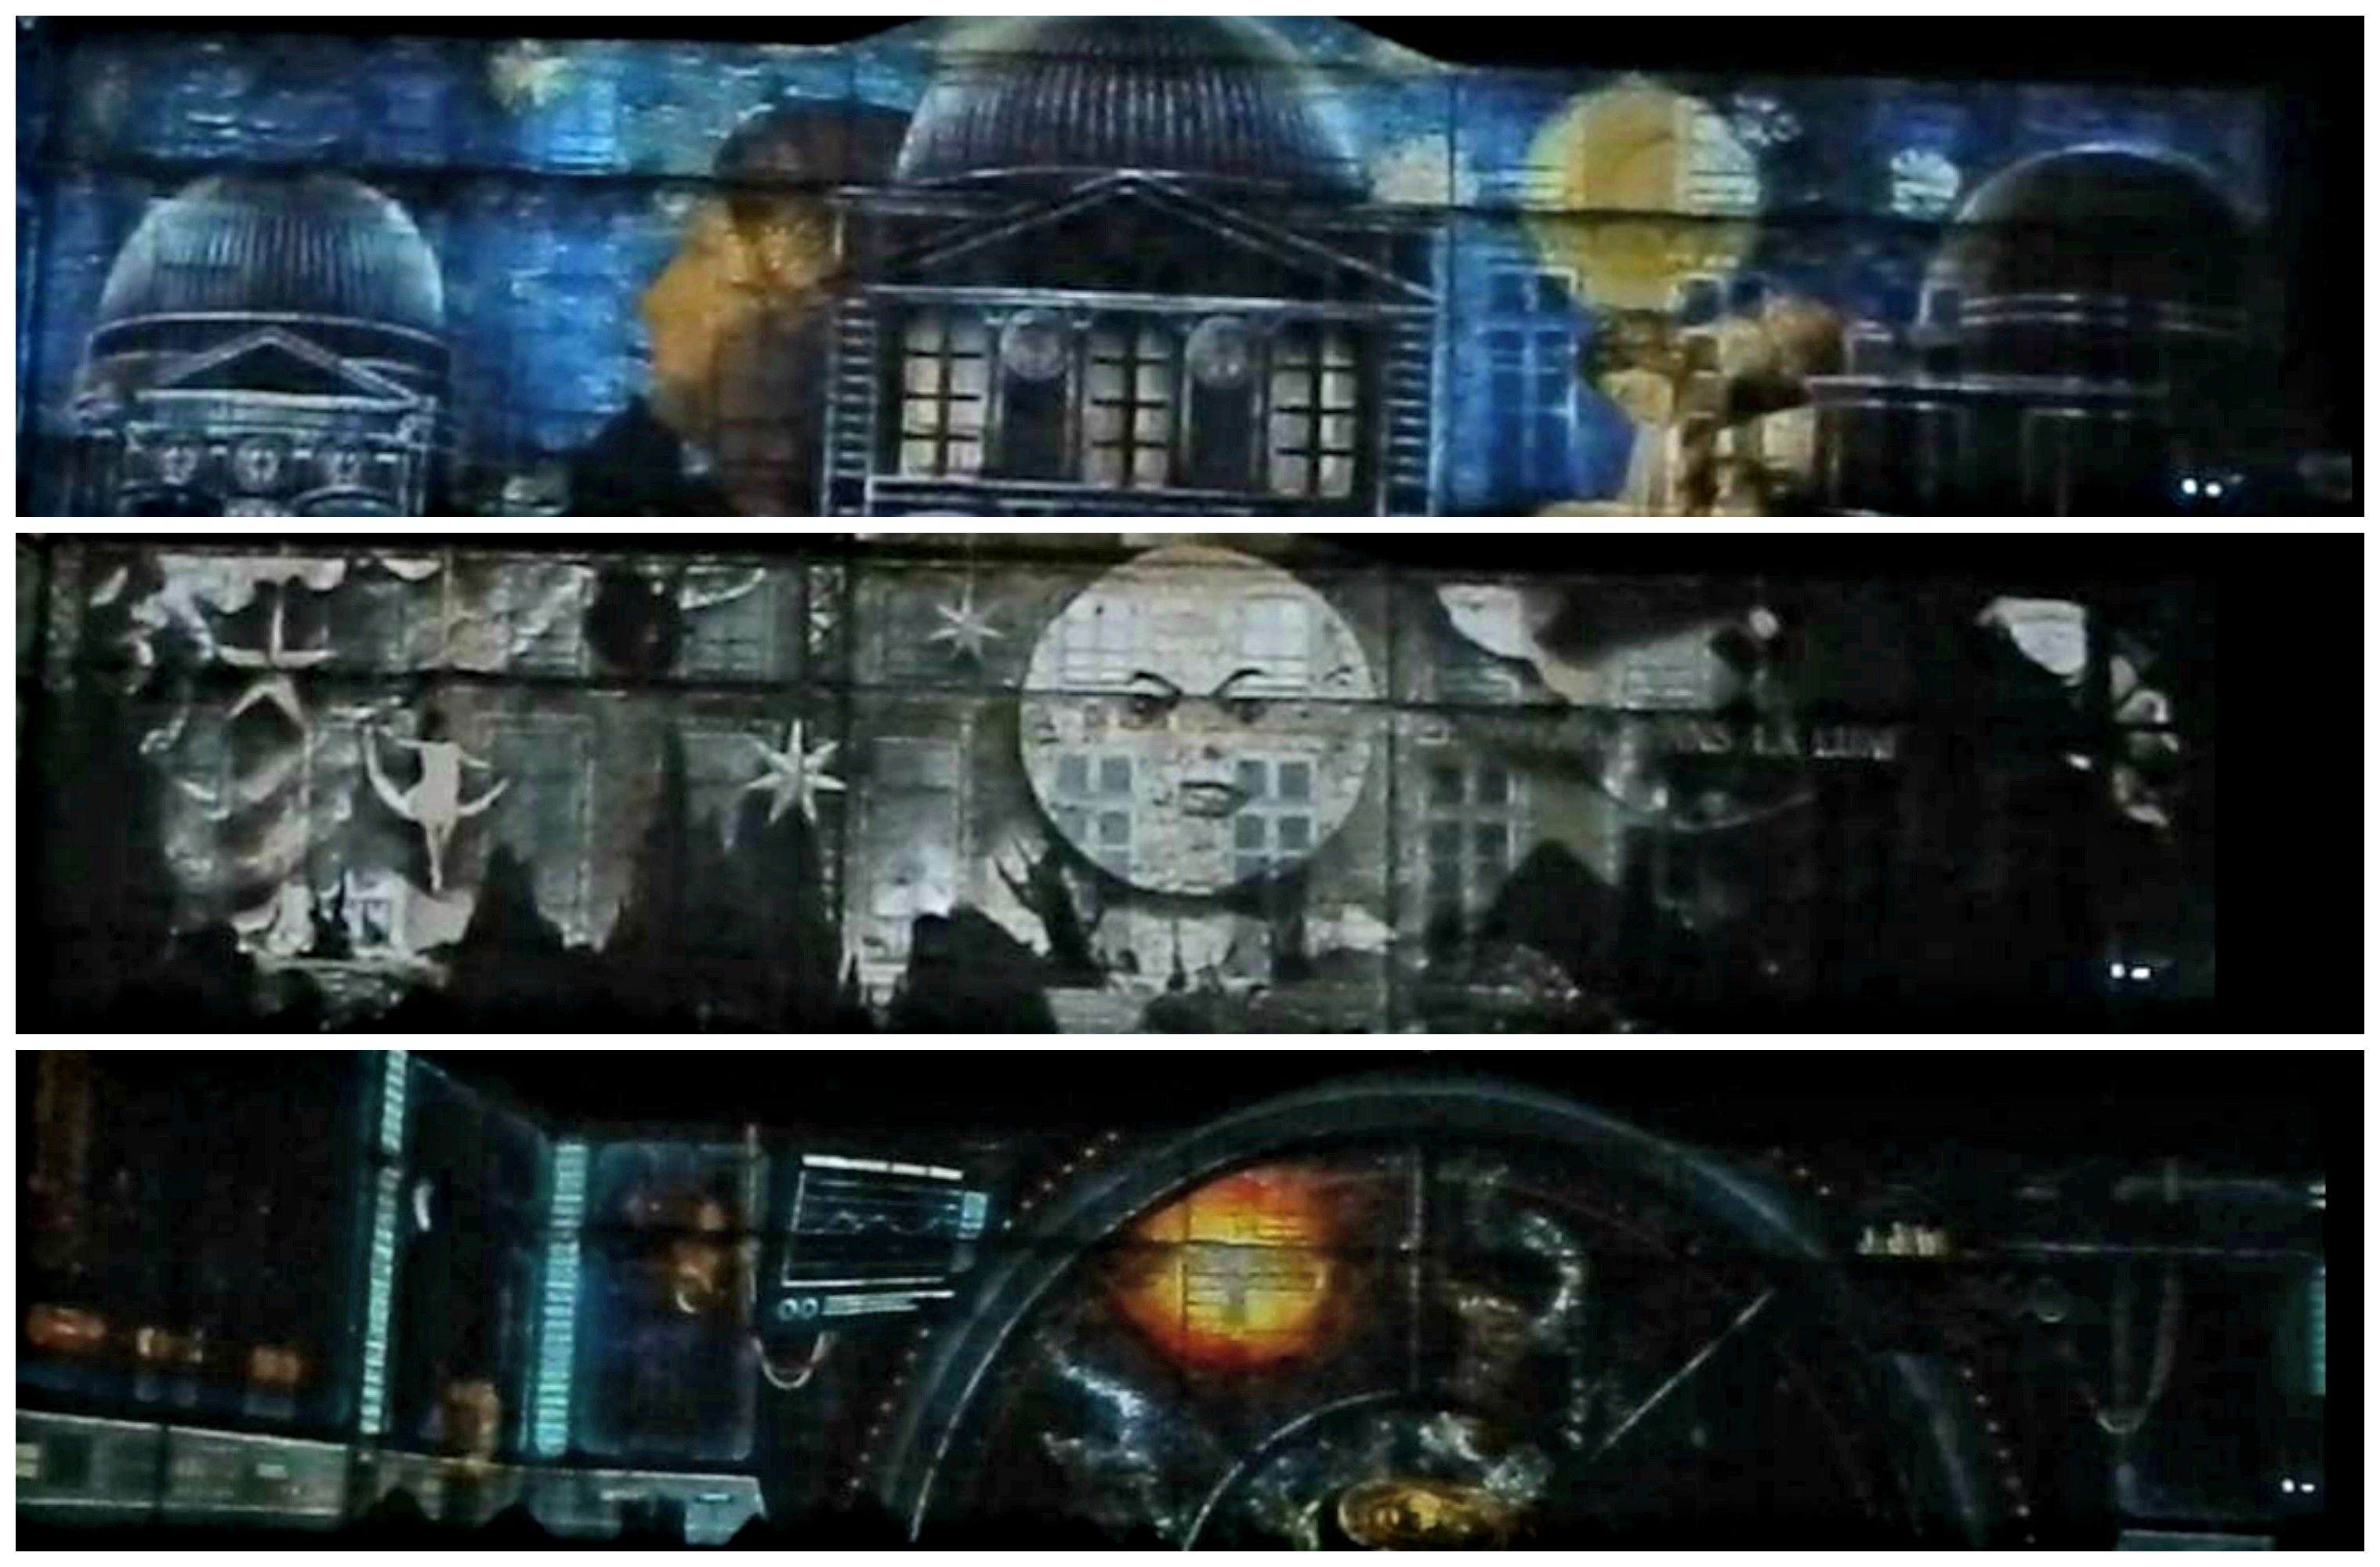 chartres en lumières mapping